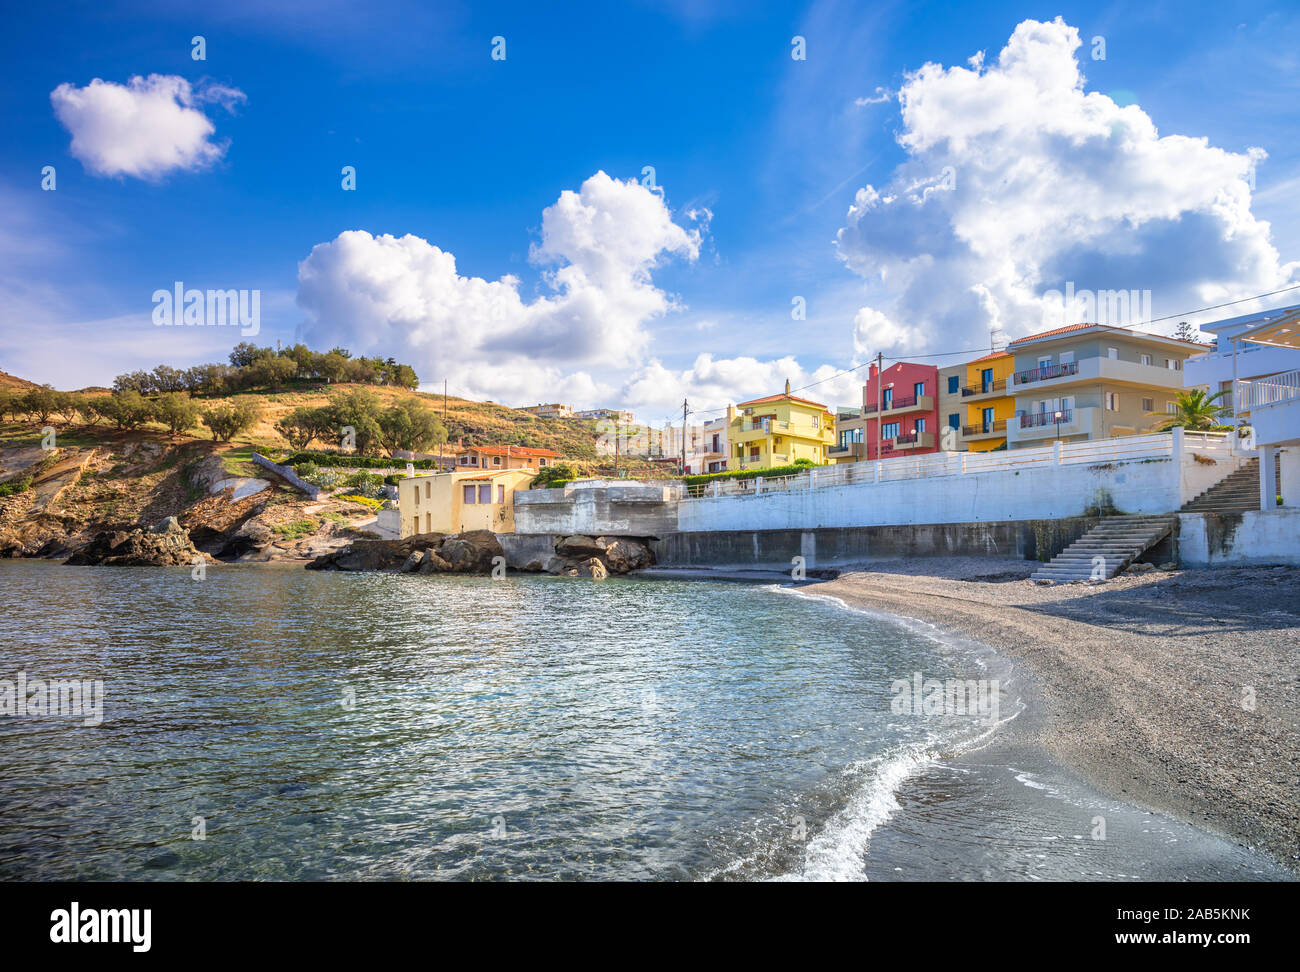 Page 2 - Beach Taverna Crete High Resolution Stock Photography and Images -  Alamy